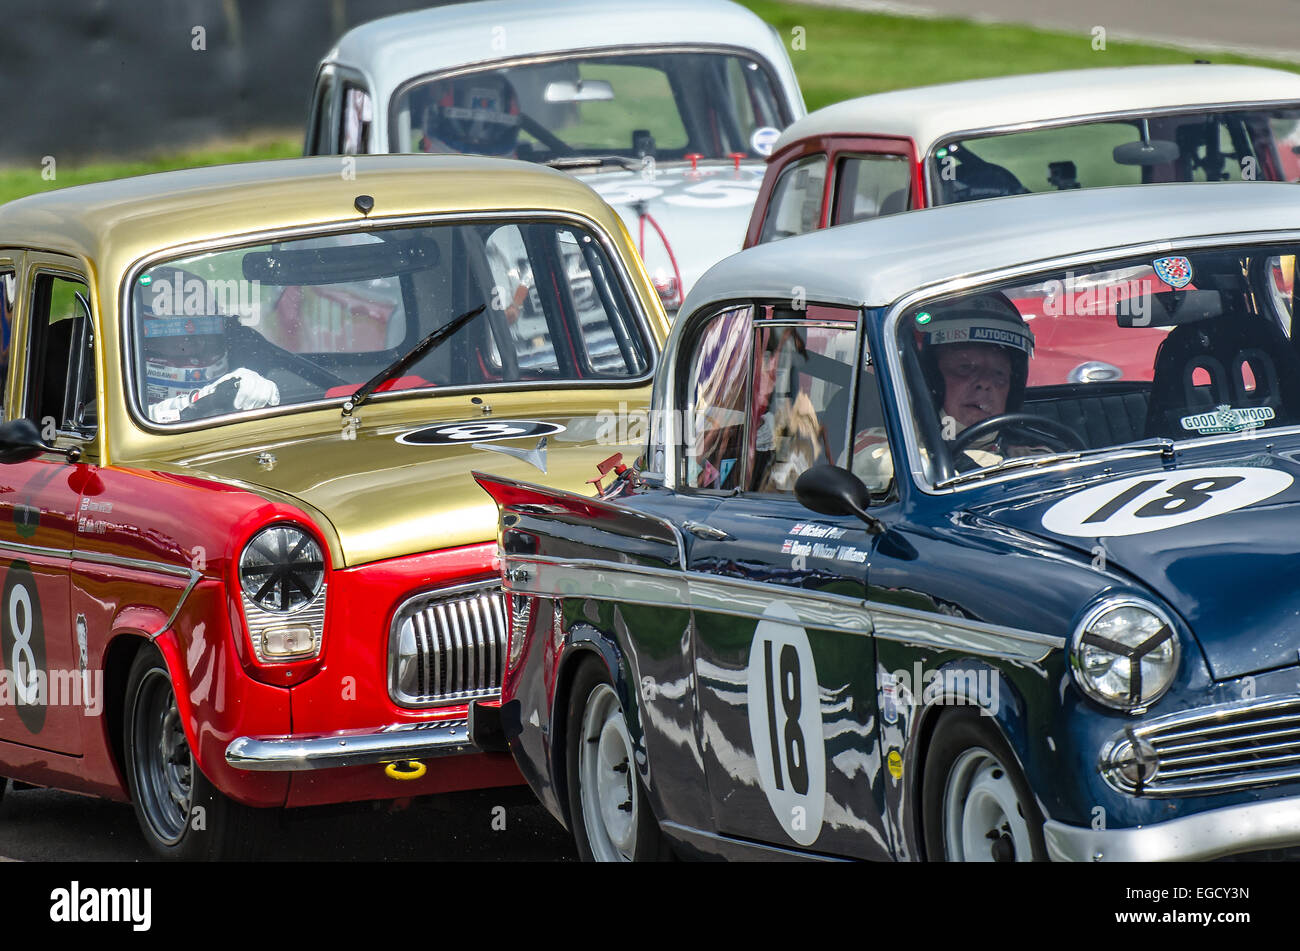 Classic saloon cars racing at the Goodwood Revival. Group of vintage race cars close together Stock Photo